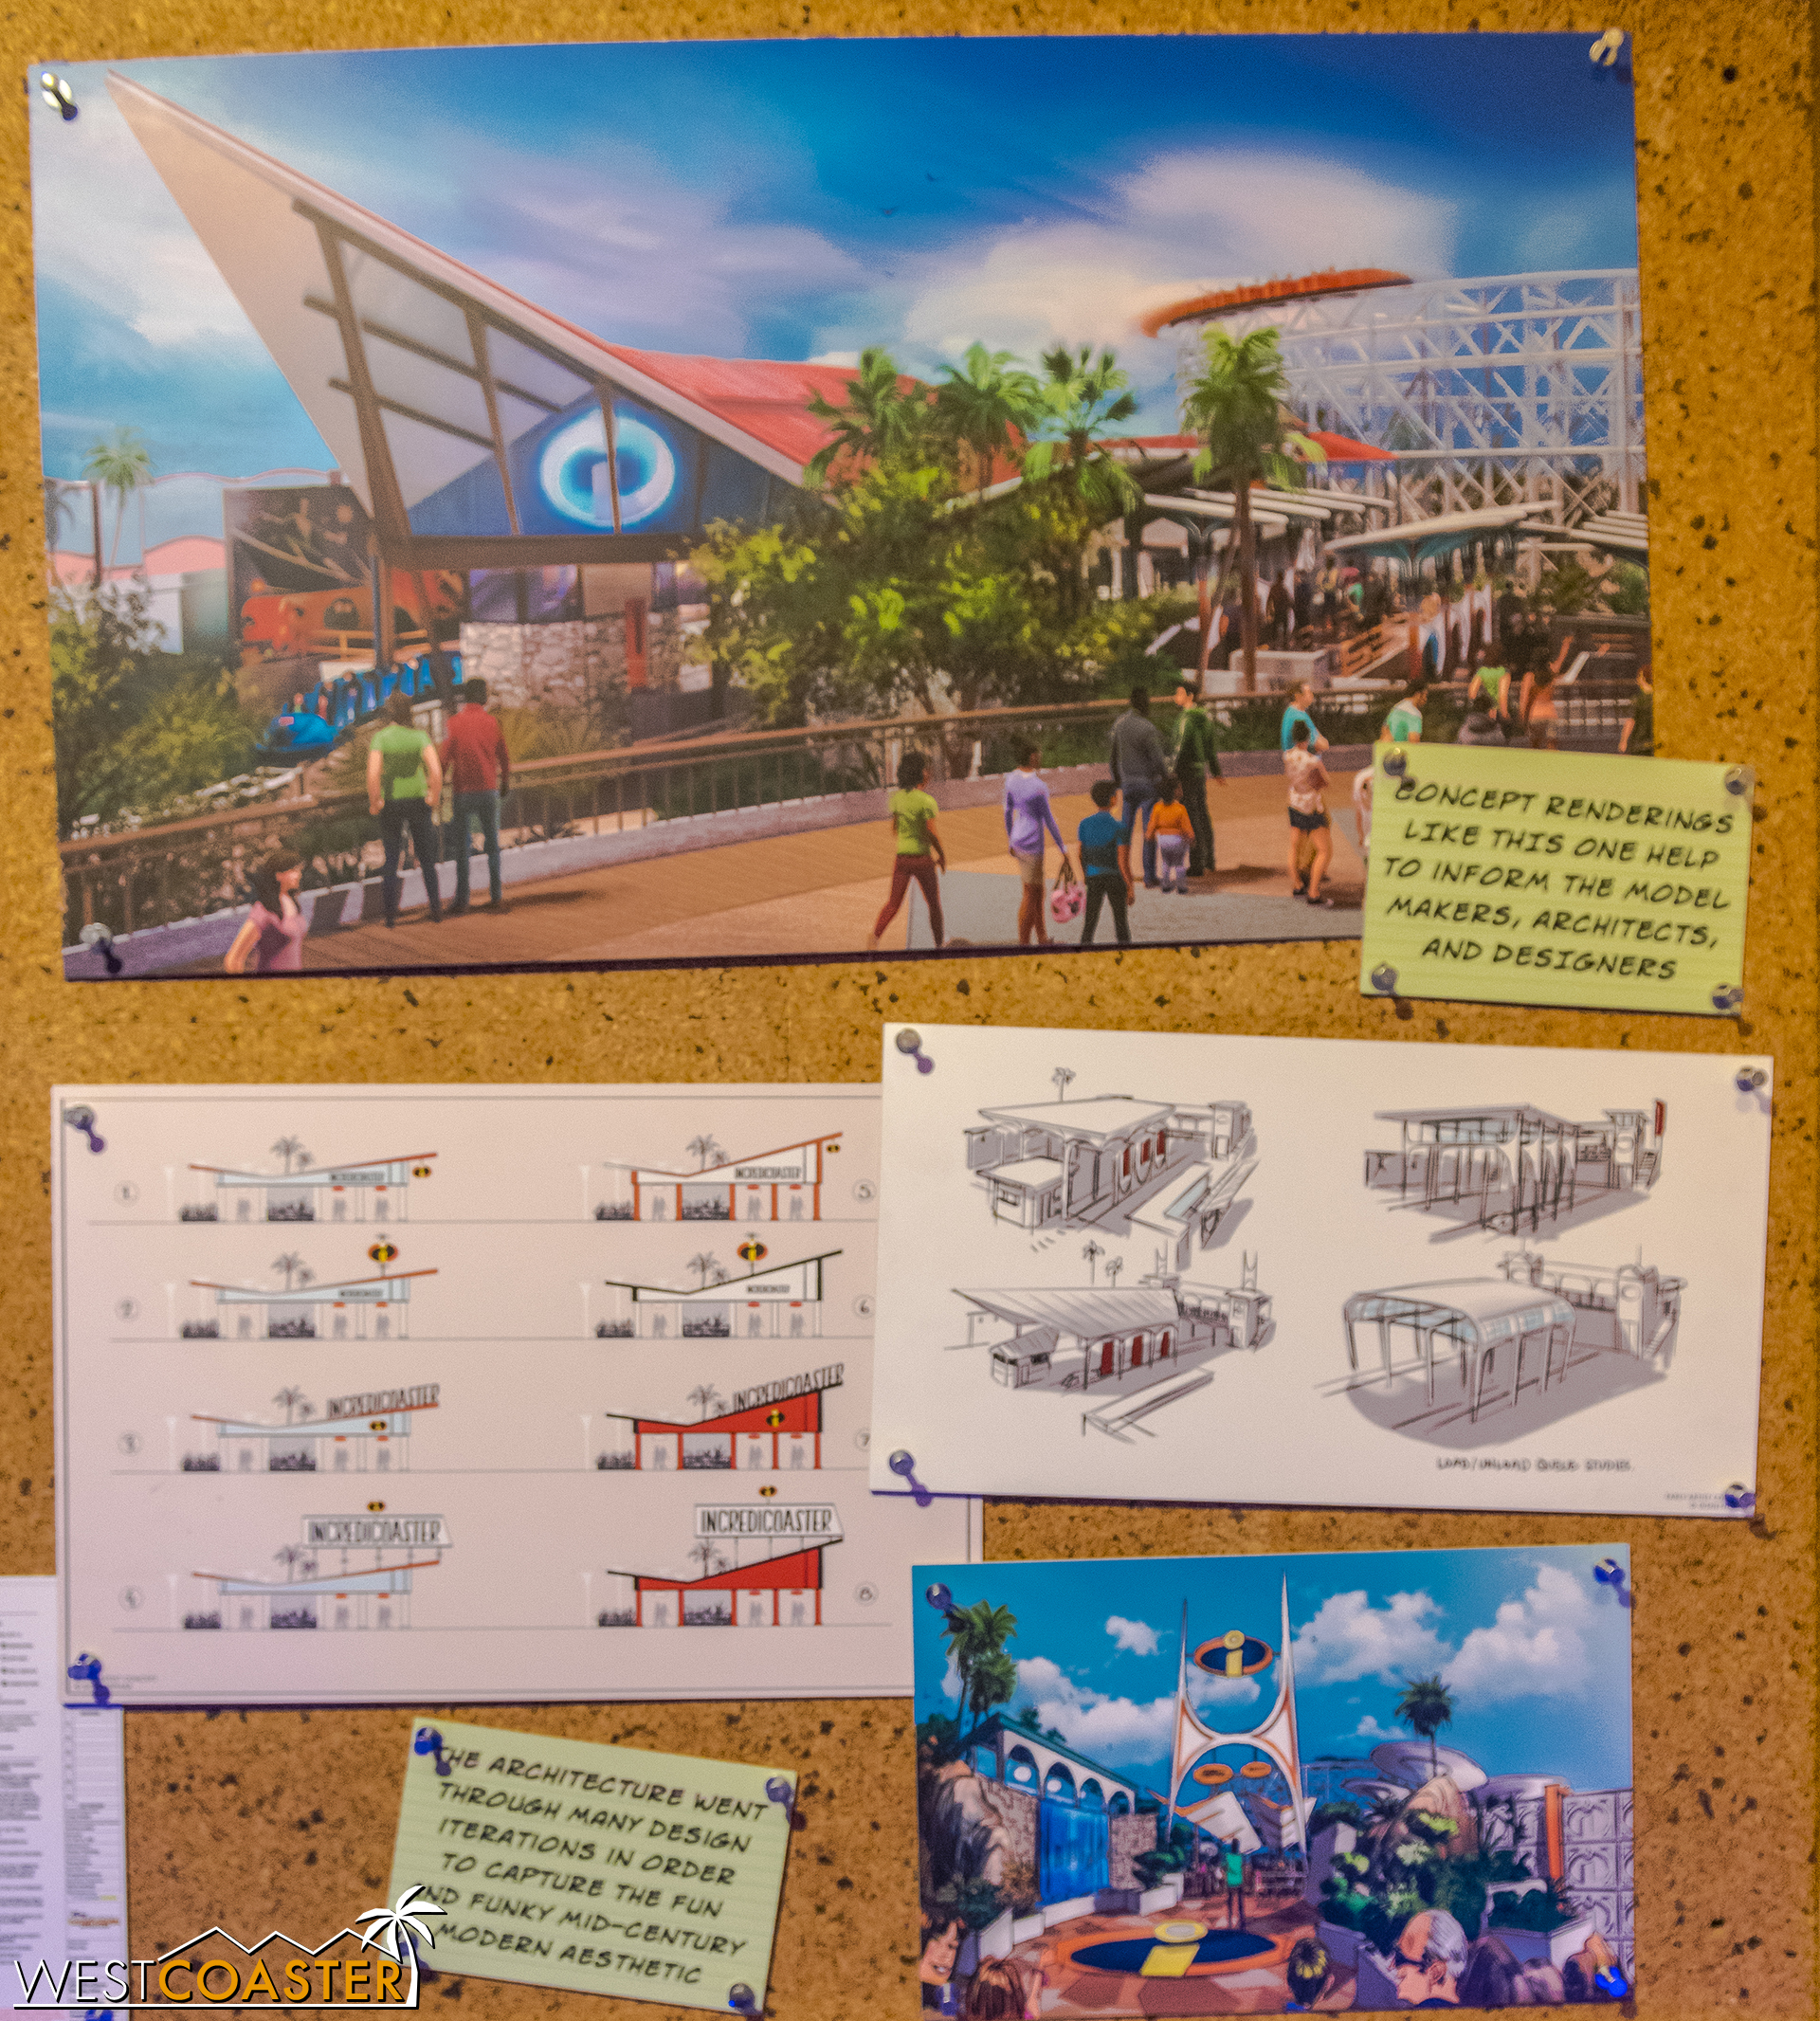  Some studies of the remodeled Incredicoaster station.  